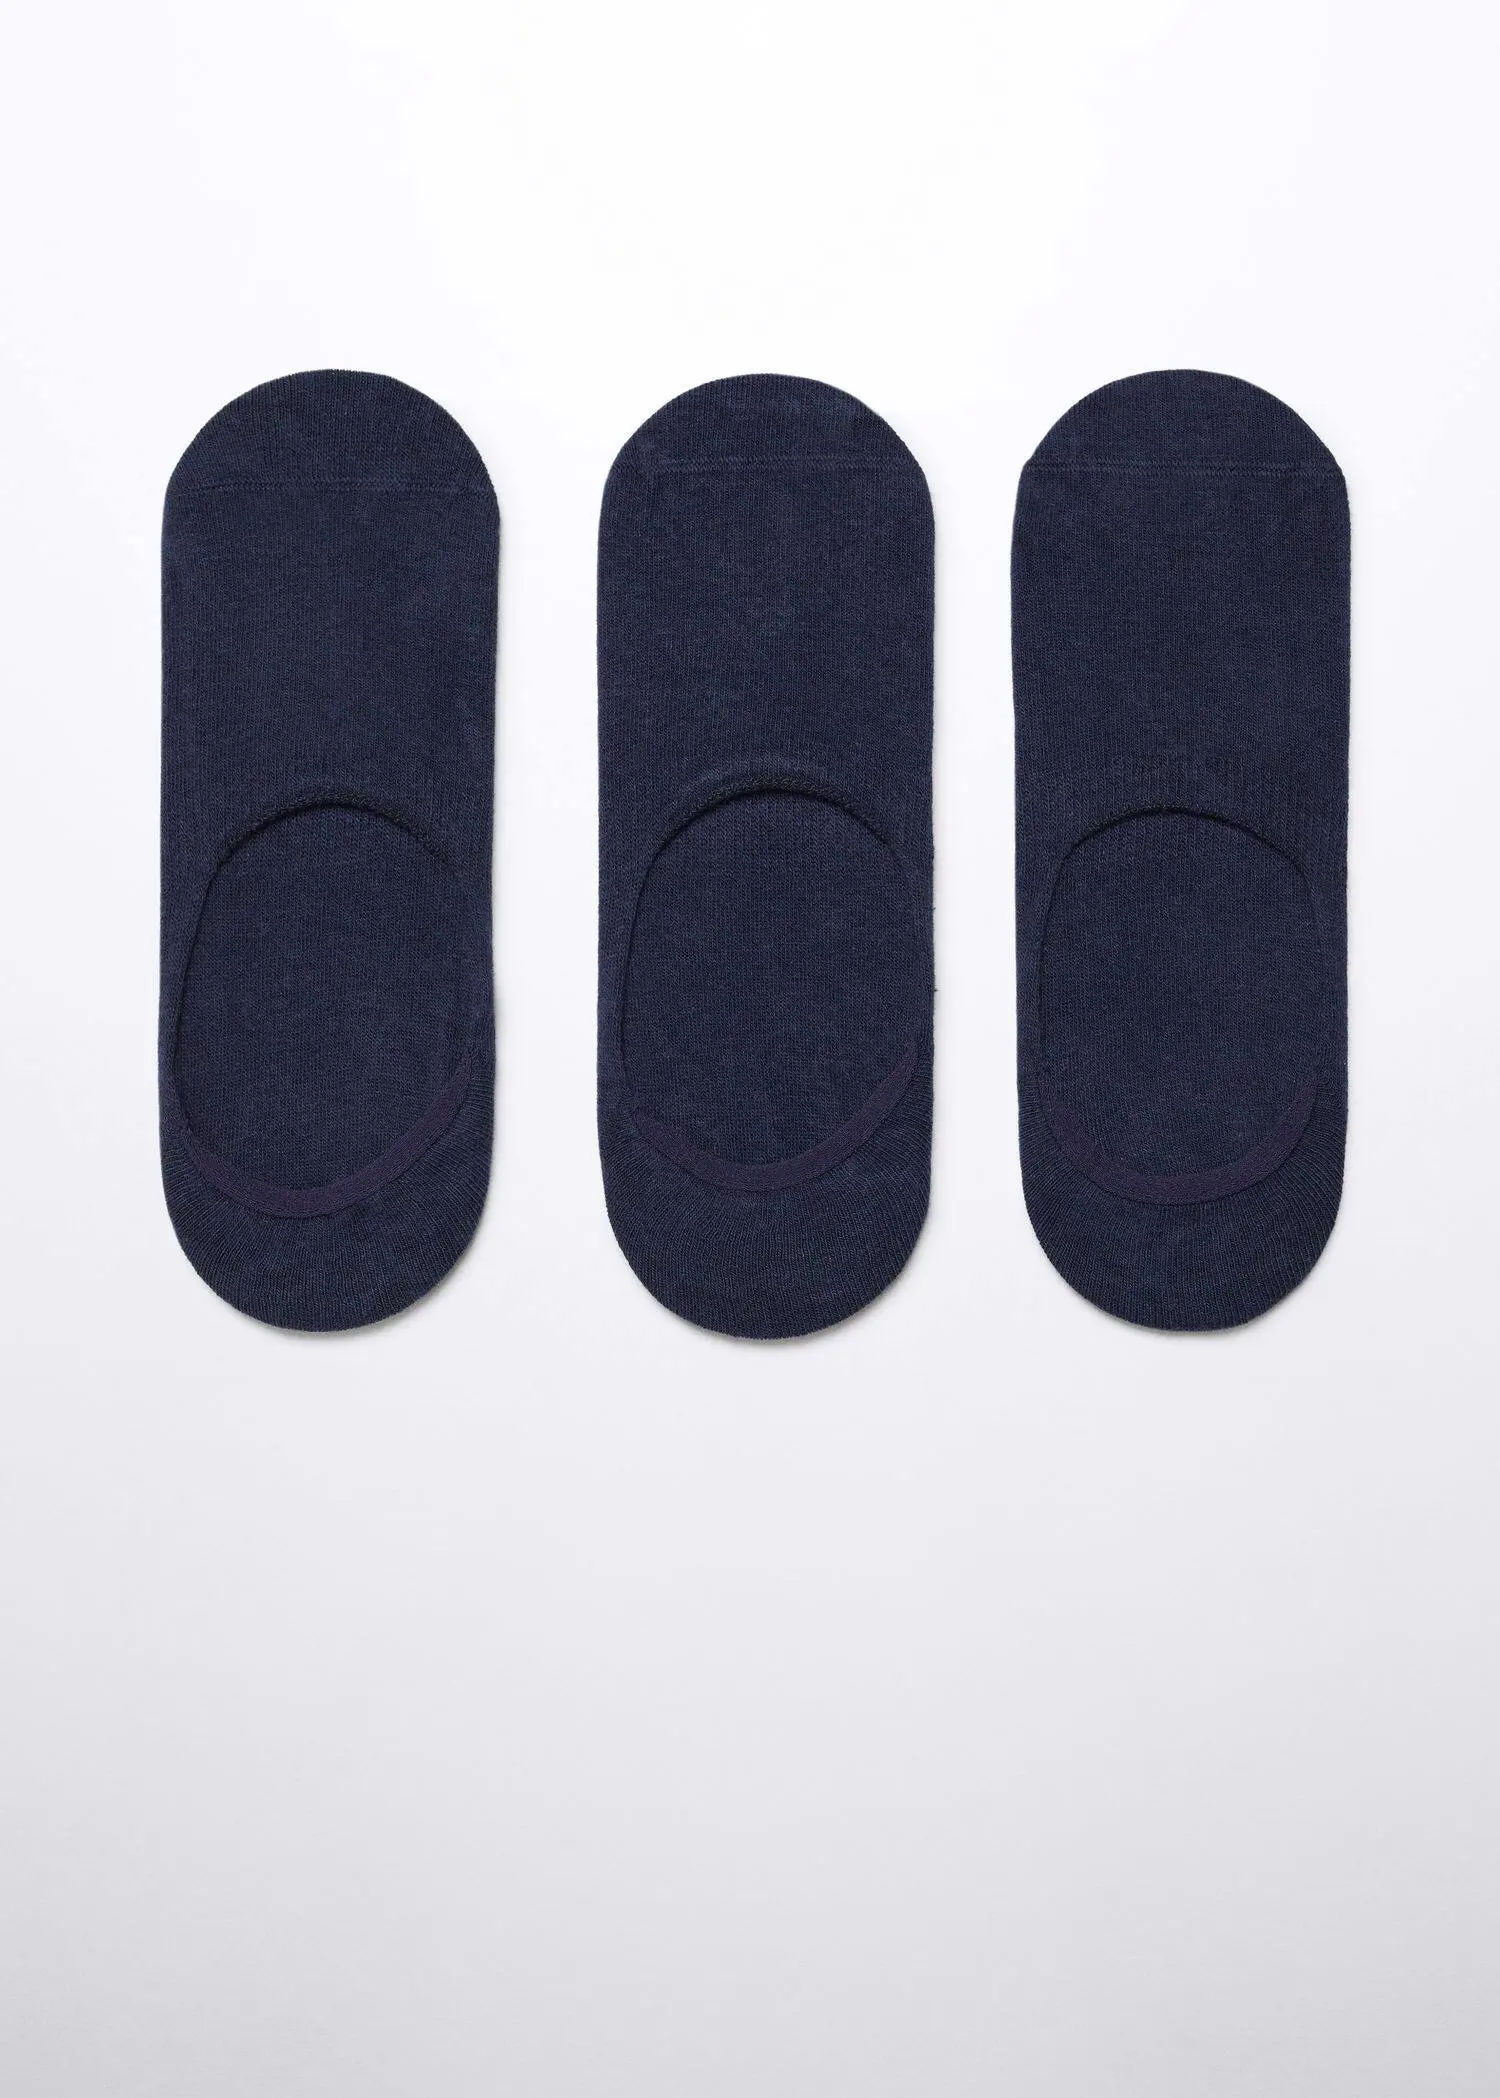 Mango 3-pack of invisible socks. three pairs of socks are shown on a white surface. 